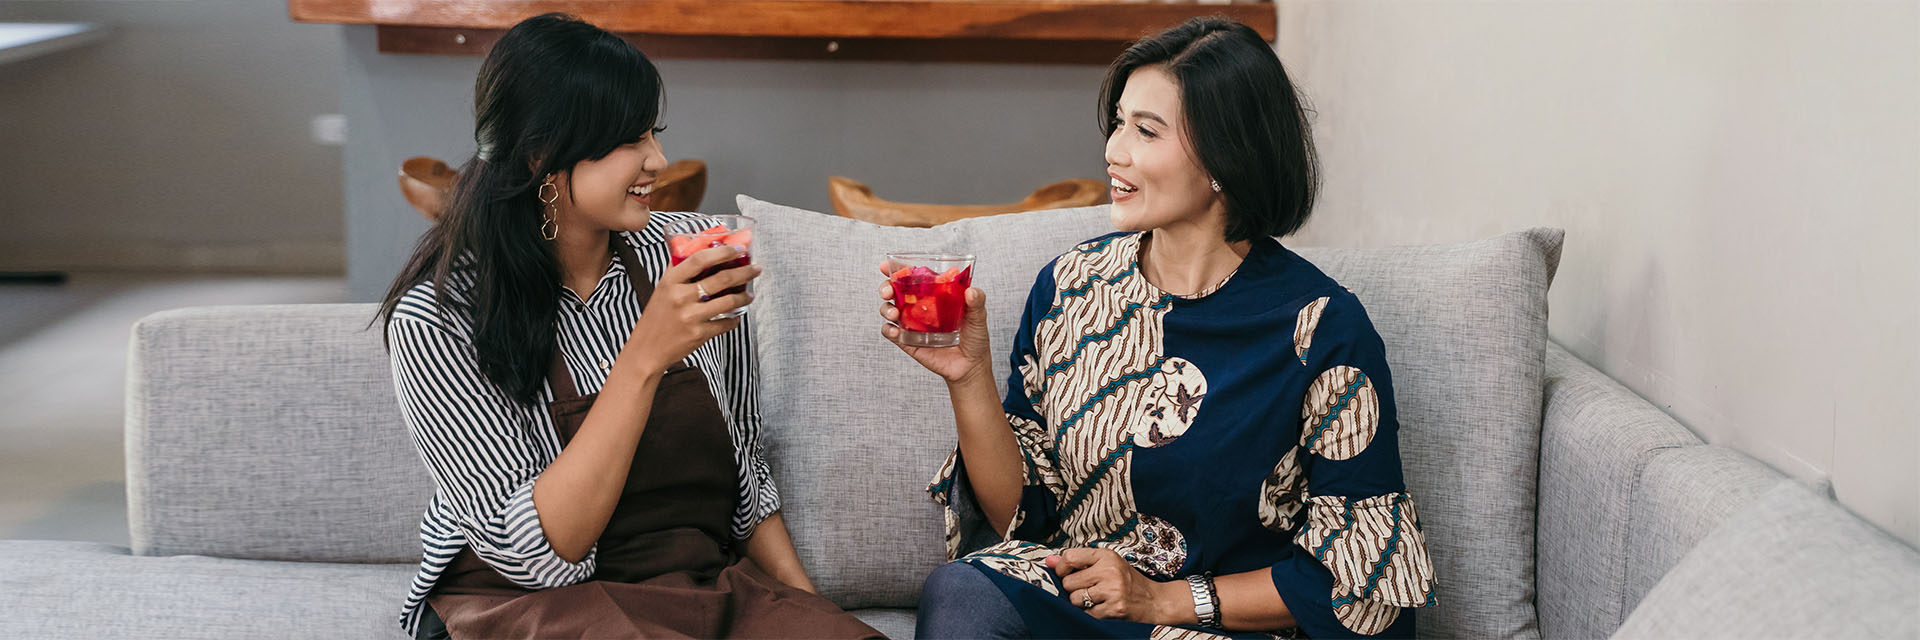 2 women drinking juice on the couch